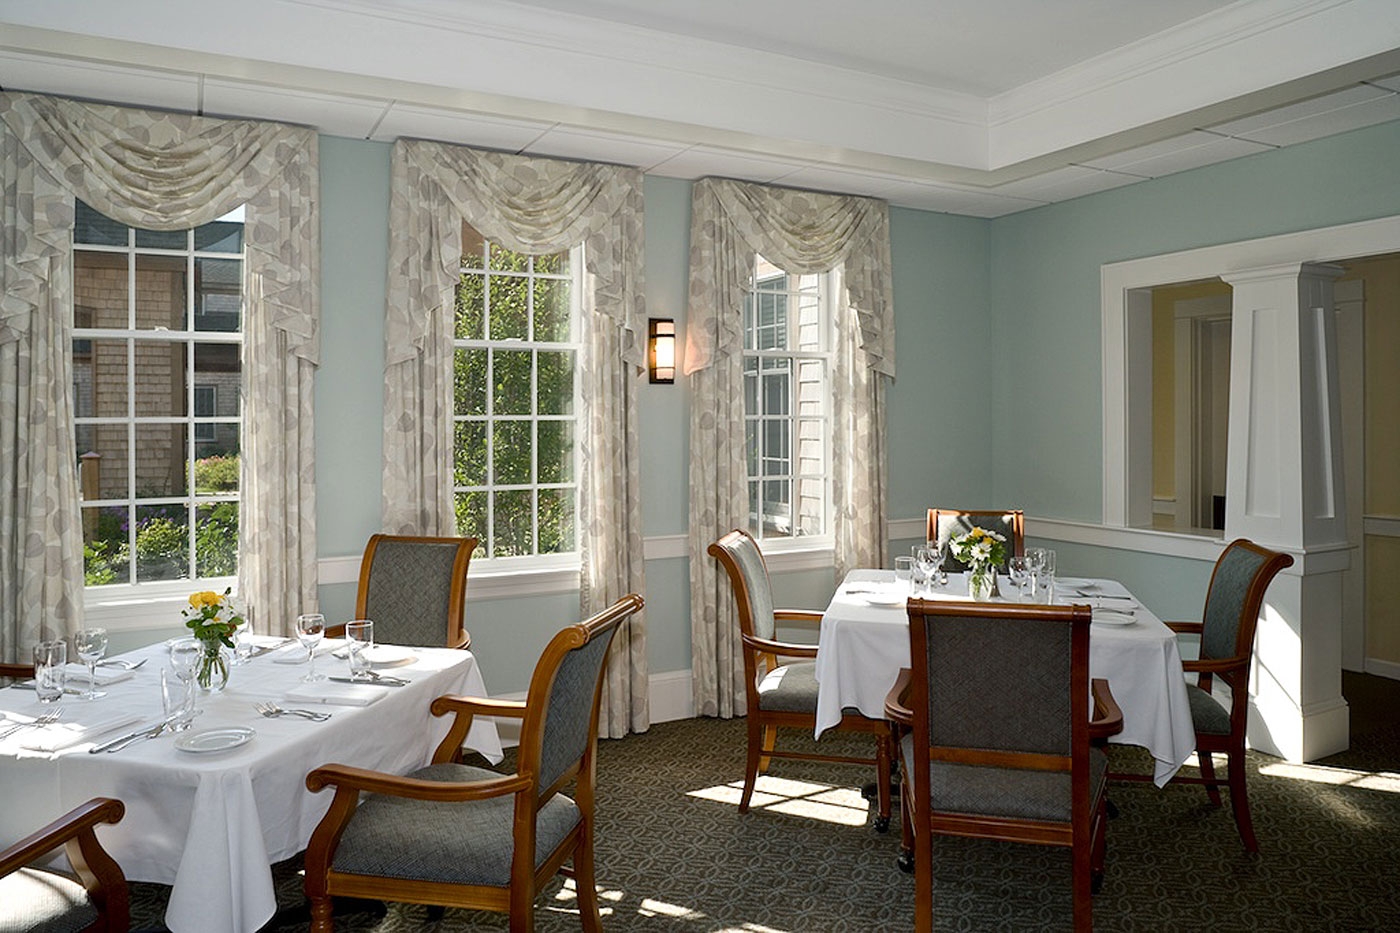 Dining area interior design for this community in Nantucket, MA.